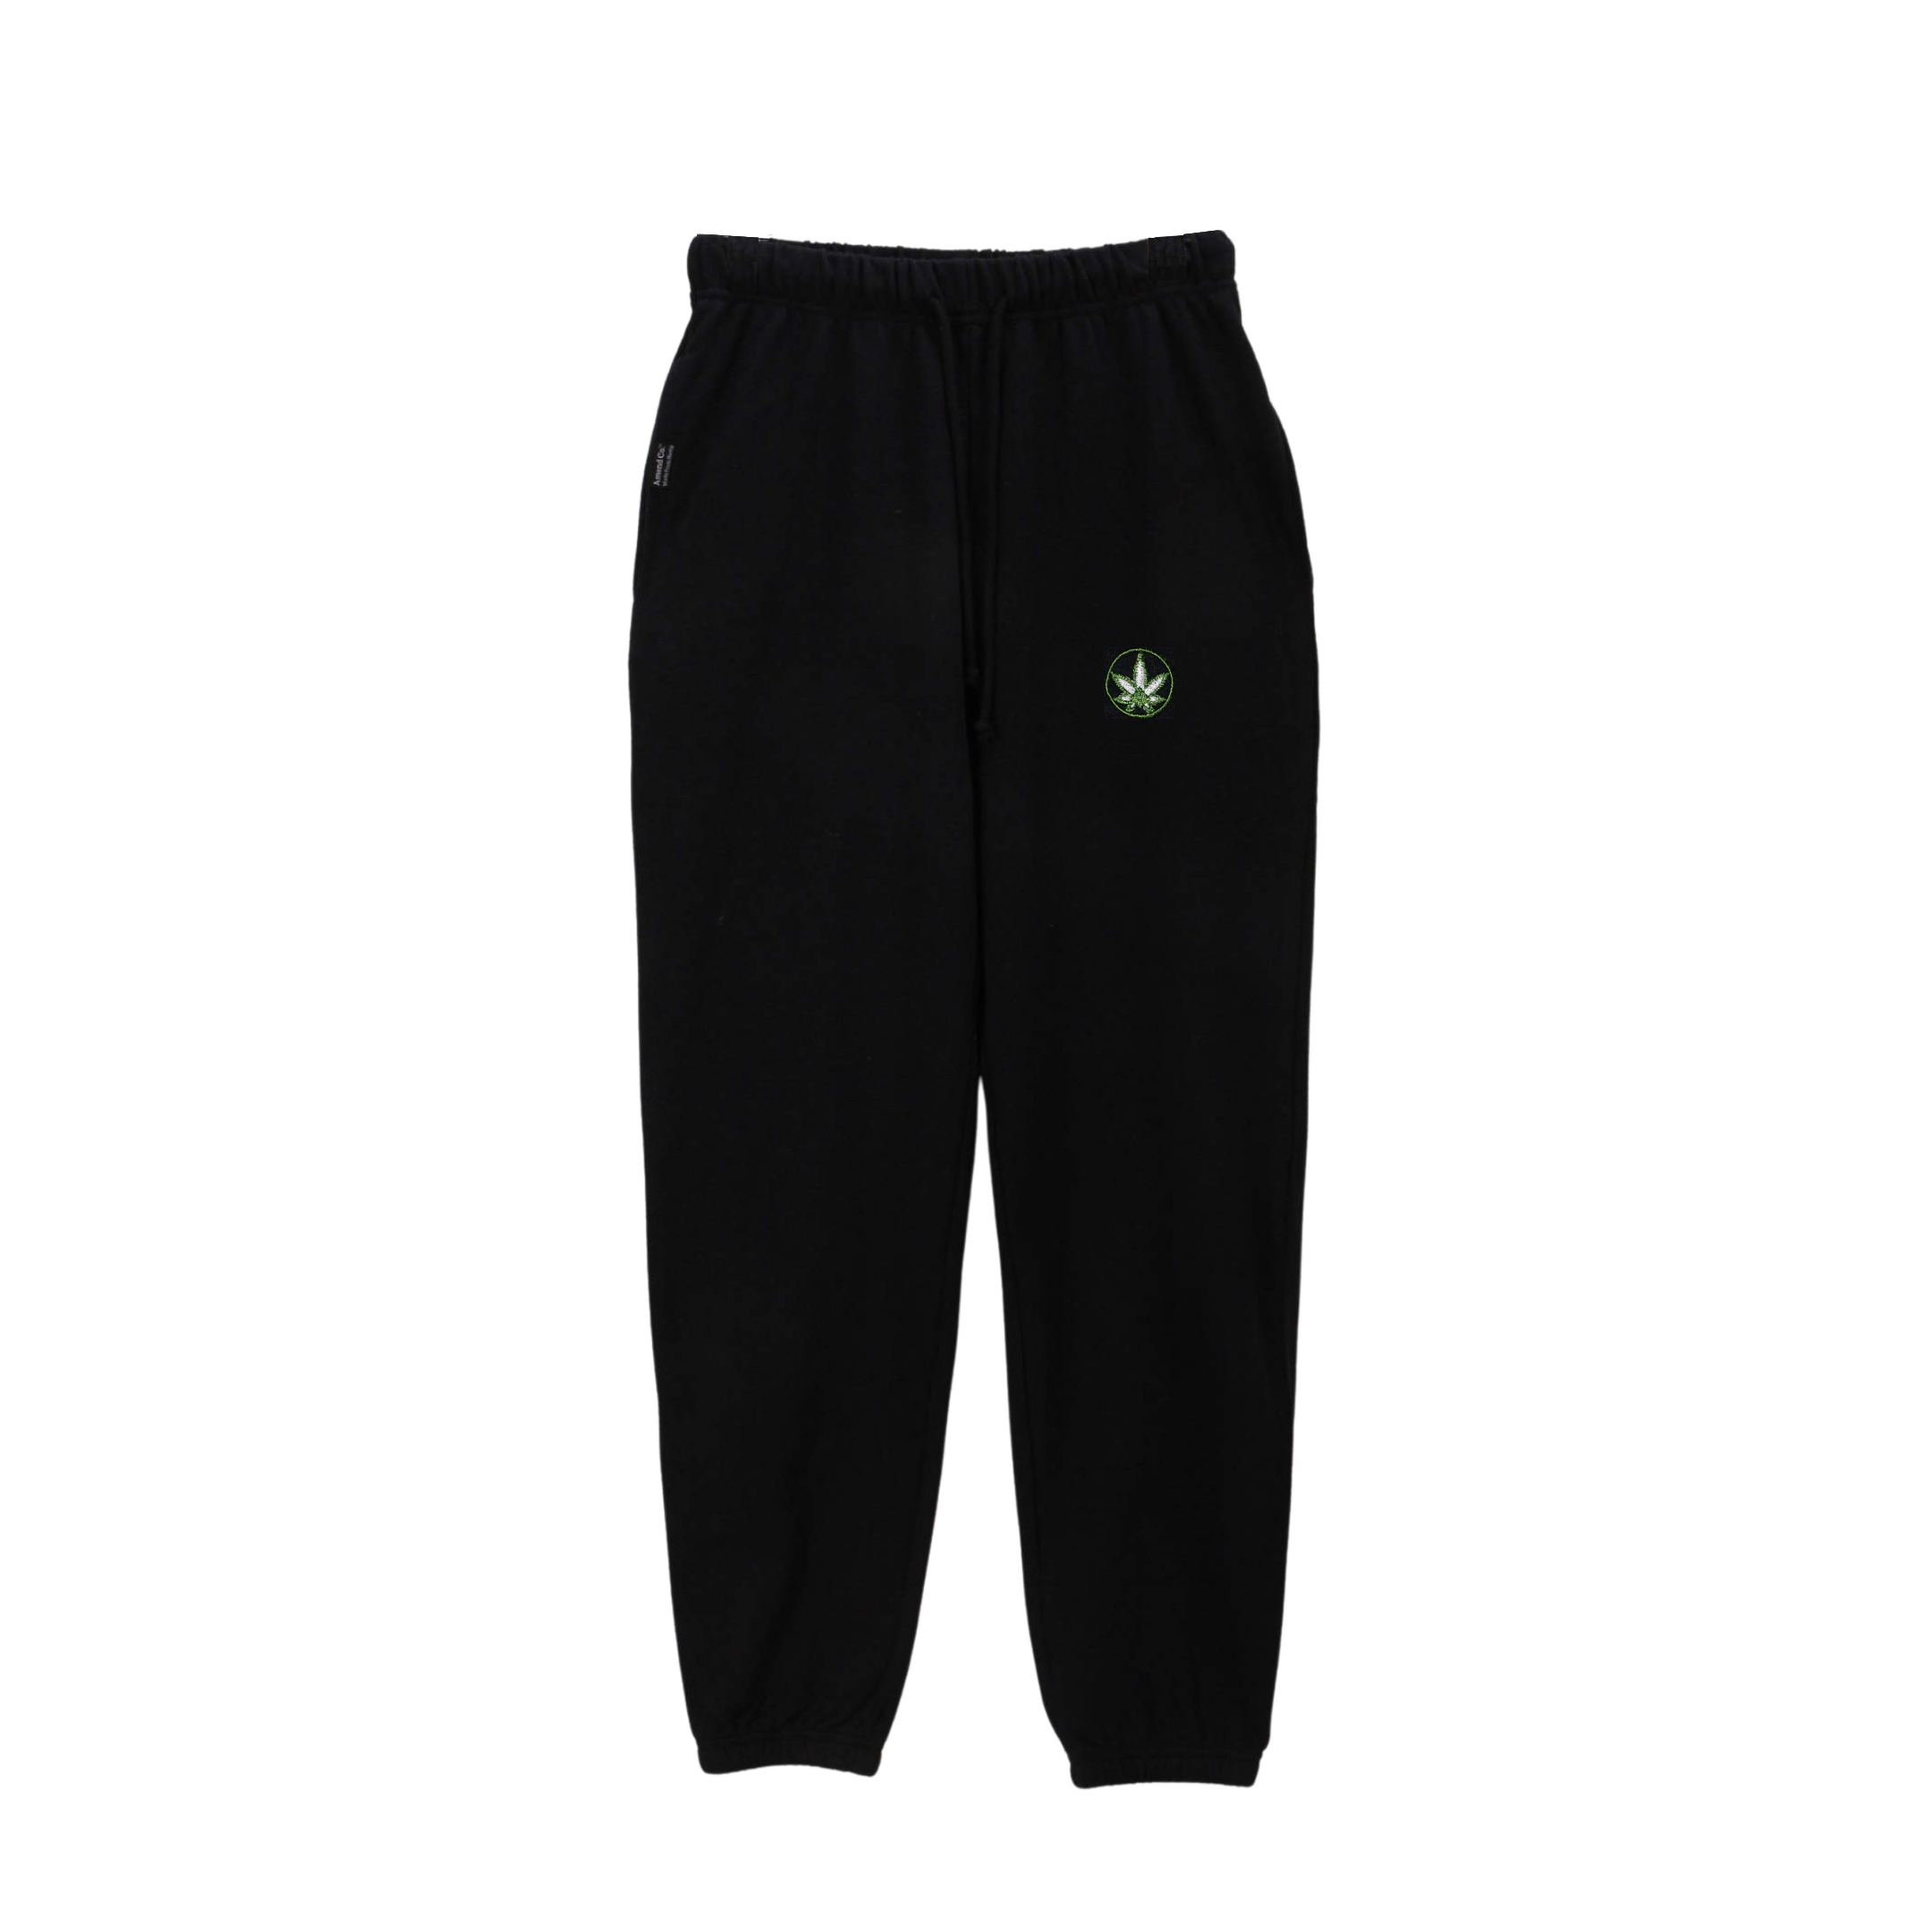 Buy wholesale The Classics Women's Sweatpants - Embroidered Logo - Black -  ORGANIC X RECYCLED - XL